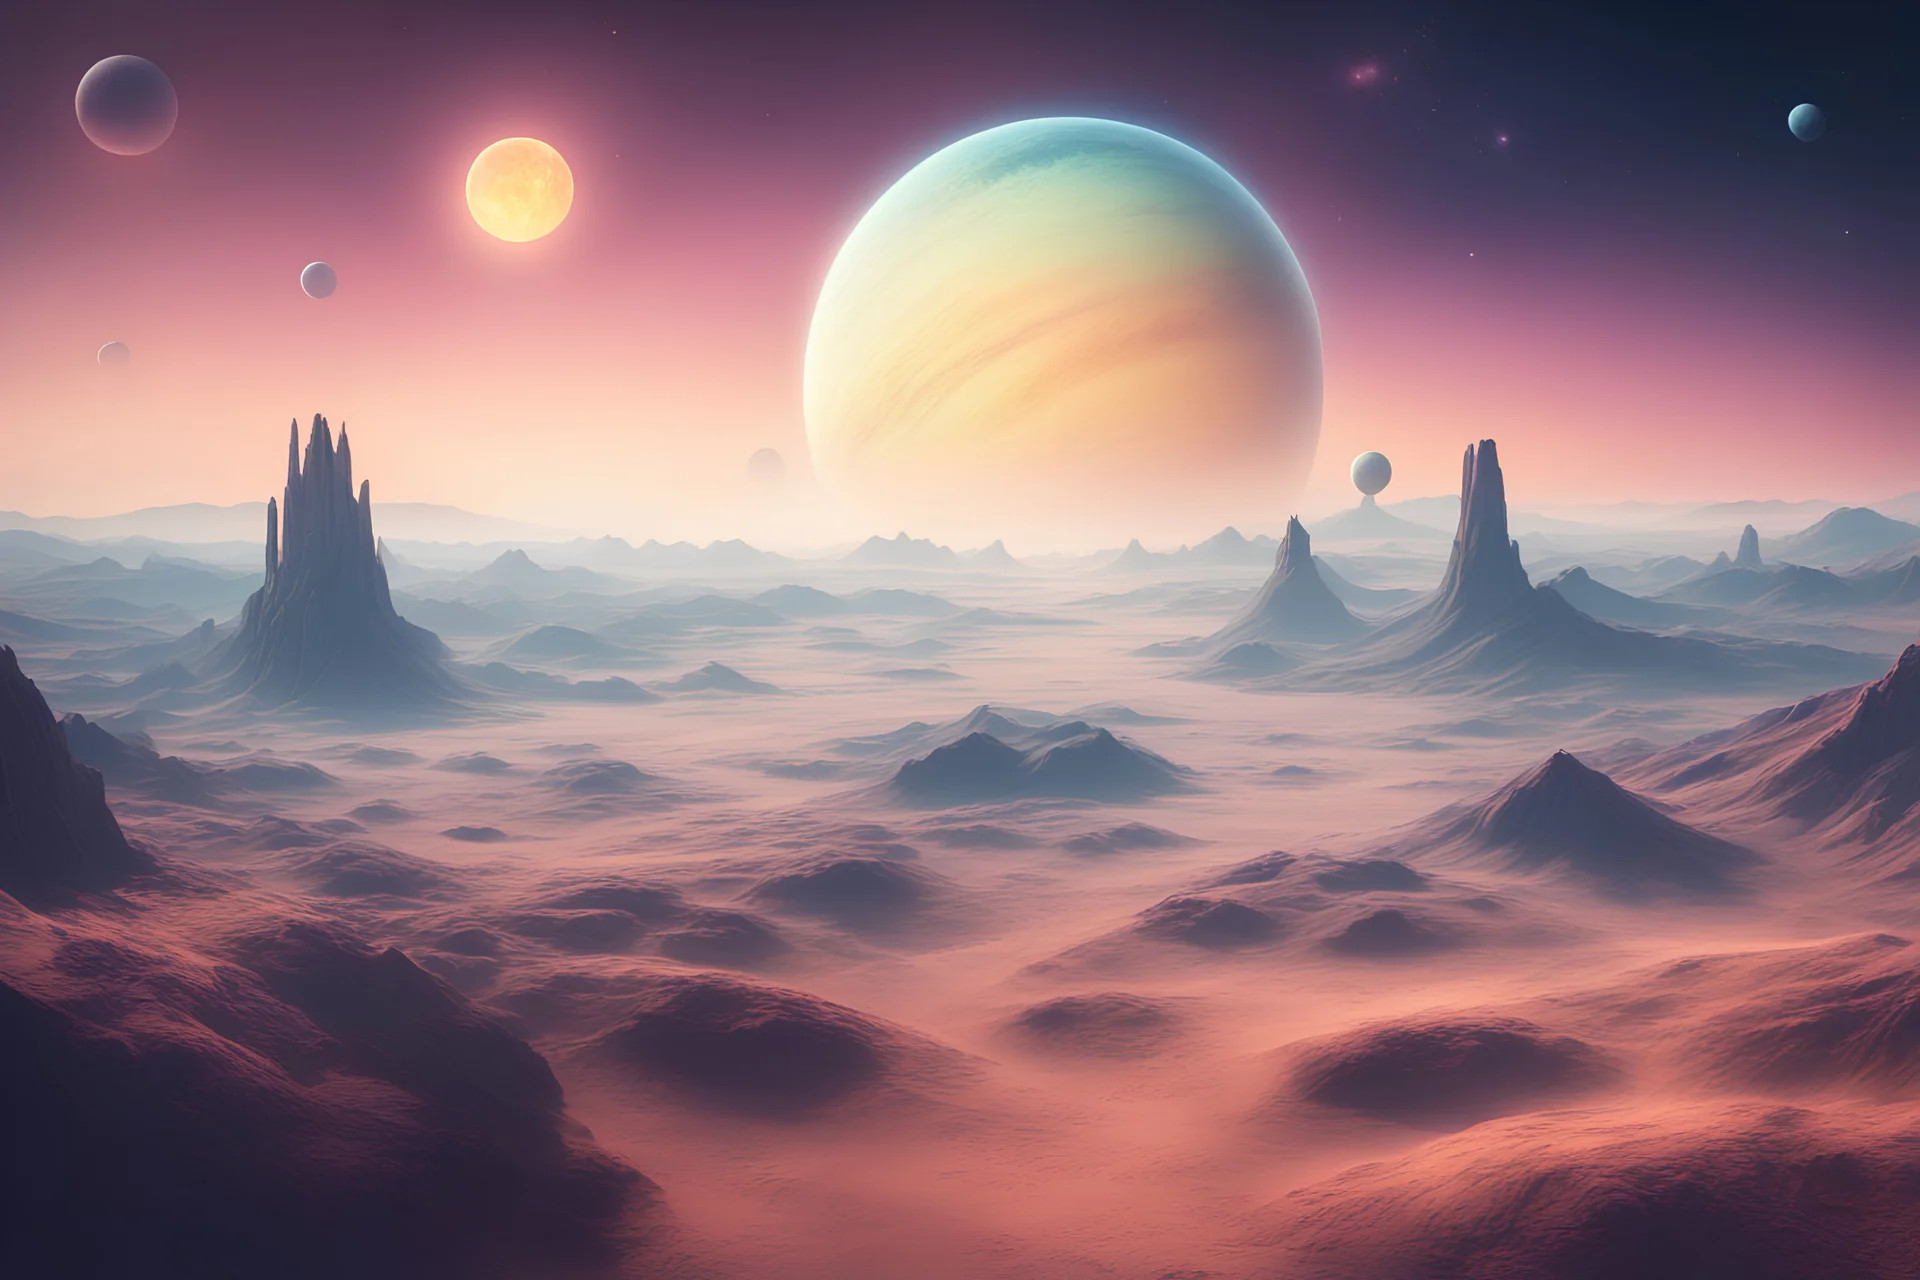 alien planet, top view of the landscape, two big planets in the sky, pastel colors, stylized, Bokeh, 35mm, Vivid hue, golden hour, futuristic style,